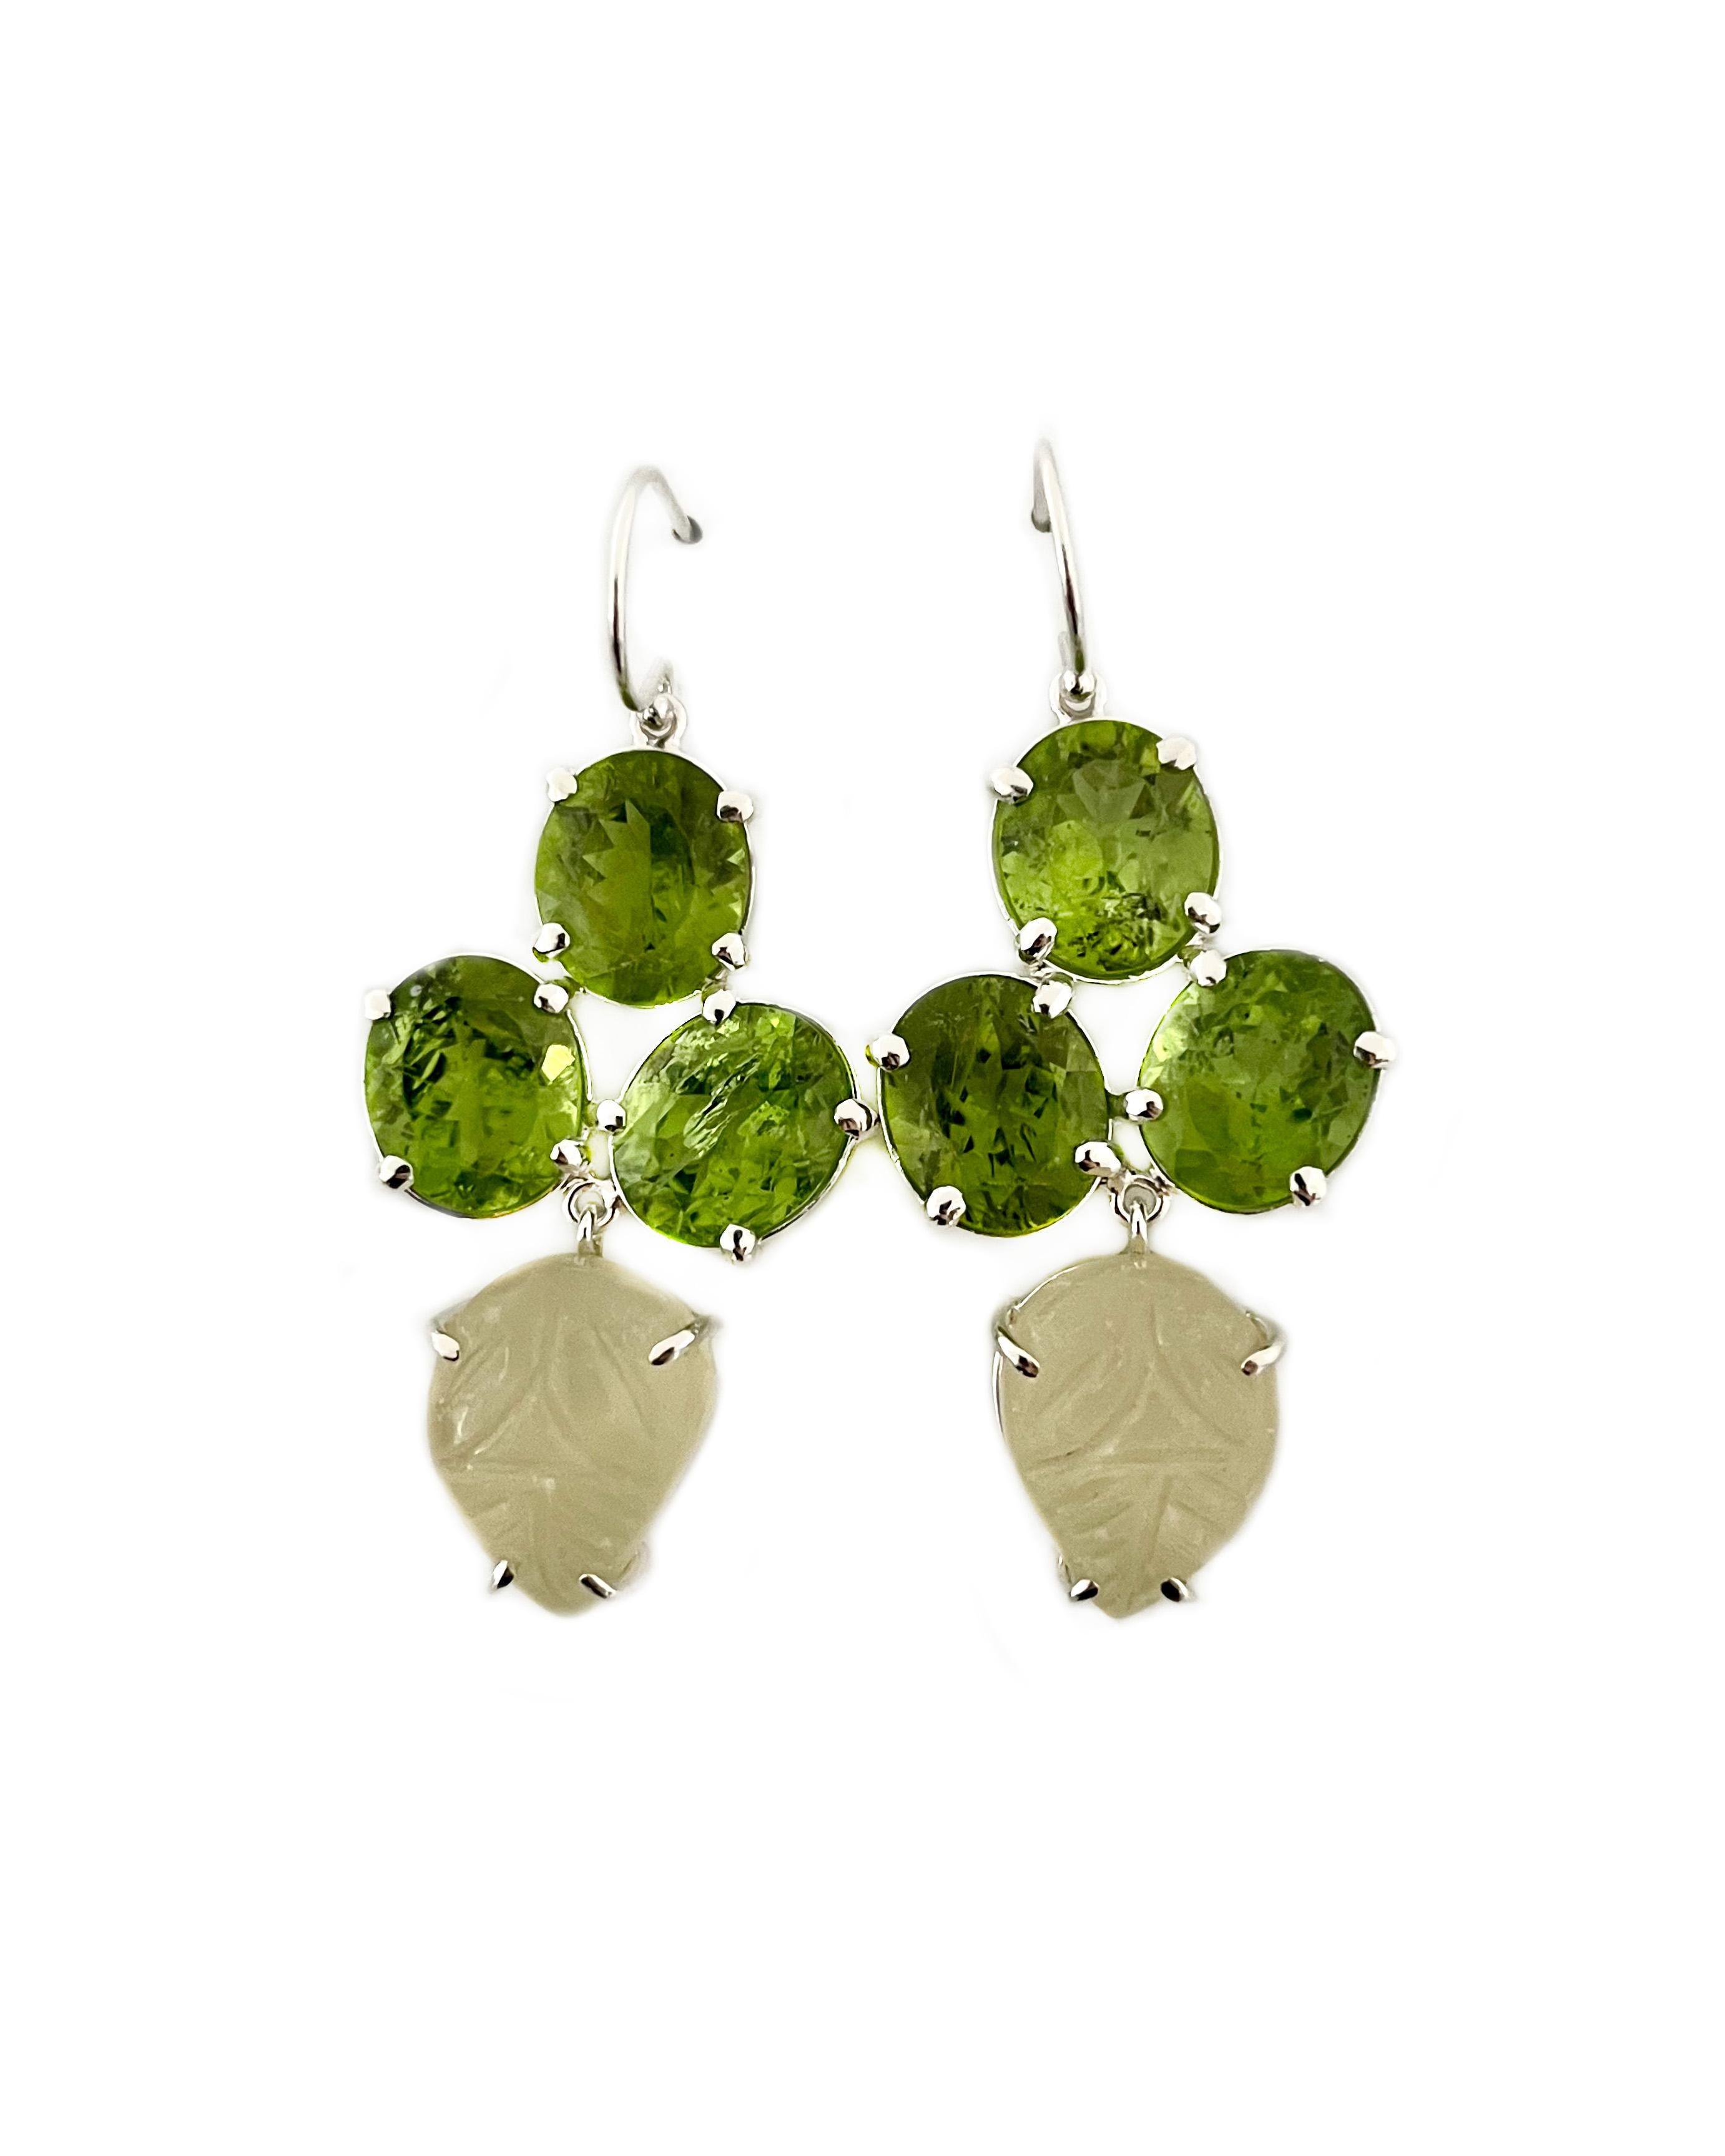 Contemporary Greenwood Earrings in Peridot, Fluorite and Sterling Silver